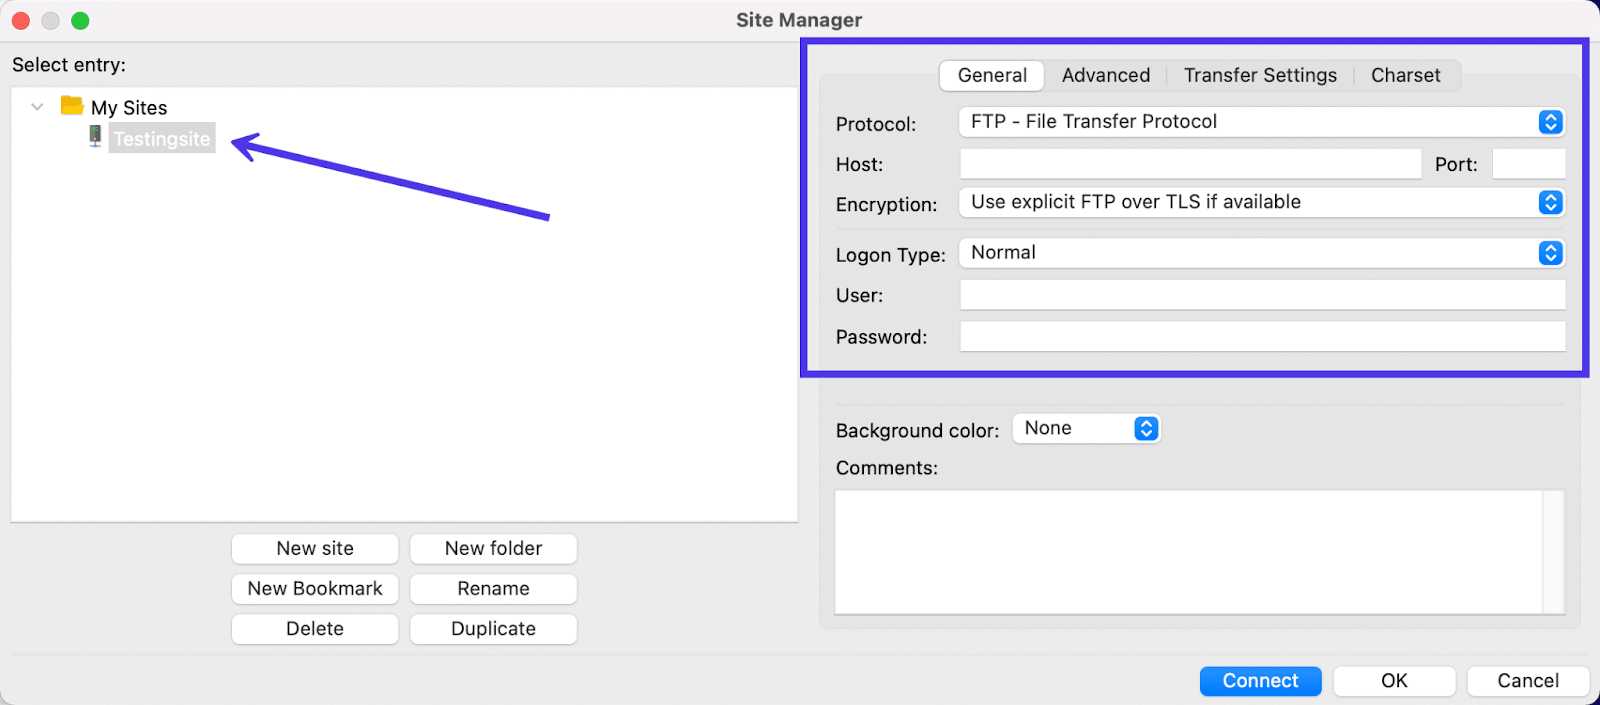 The General tab in the Site Manager contains ways to change the Protocol and type in login credentials.